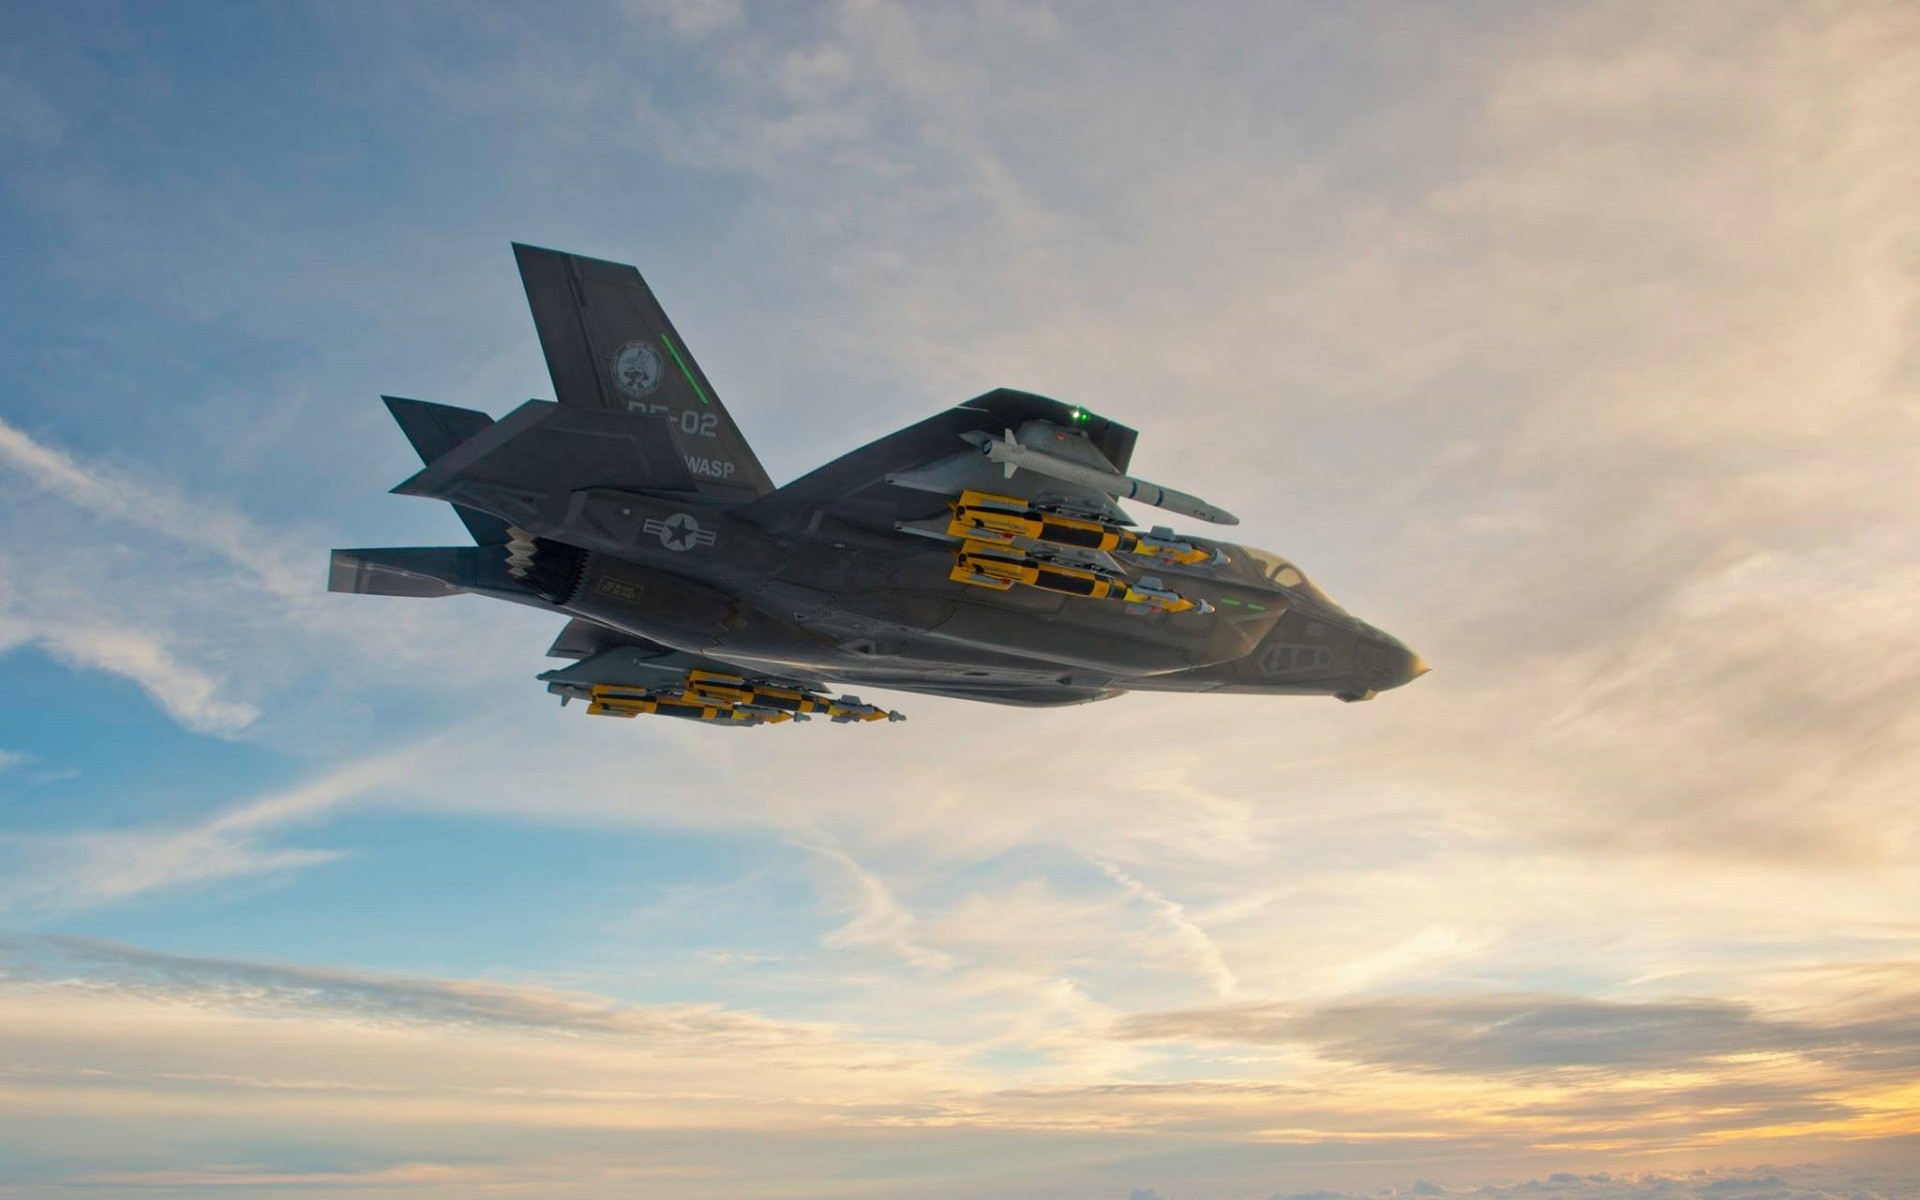 General 1920x1200 aircraft military aircraft Lockheed Martin F-35 Lightning II military vehicle vehicle Lockheed Lockheed Martin military American aircraft sunset sunset glow sky flying clouds orange sky bottom view missiles sunlight